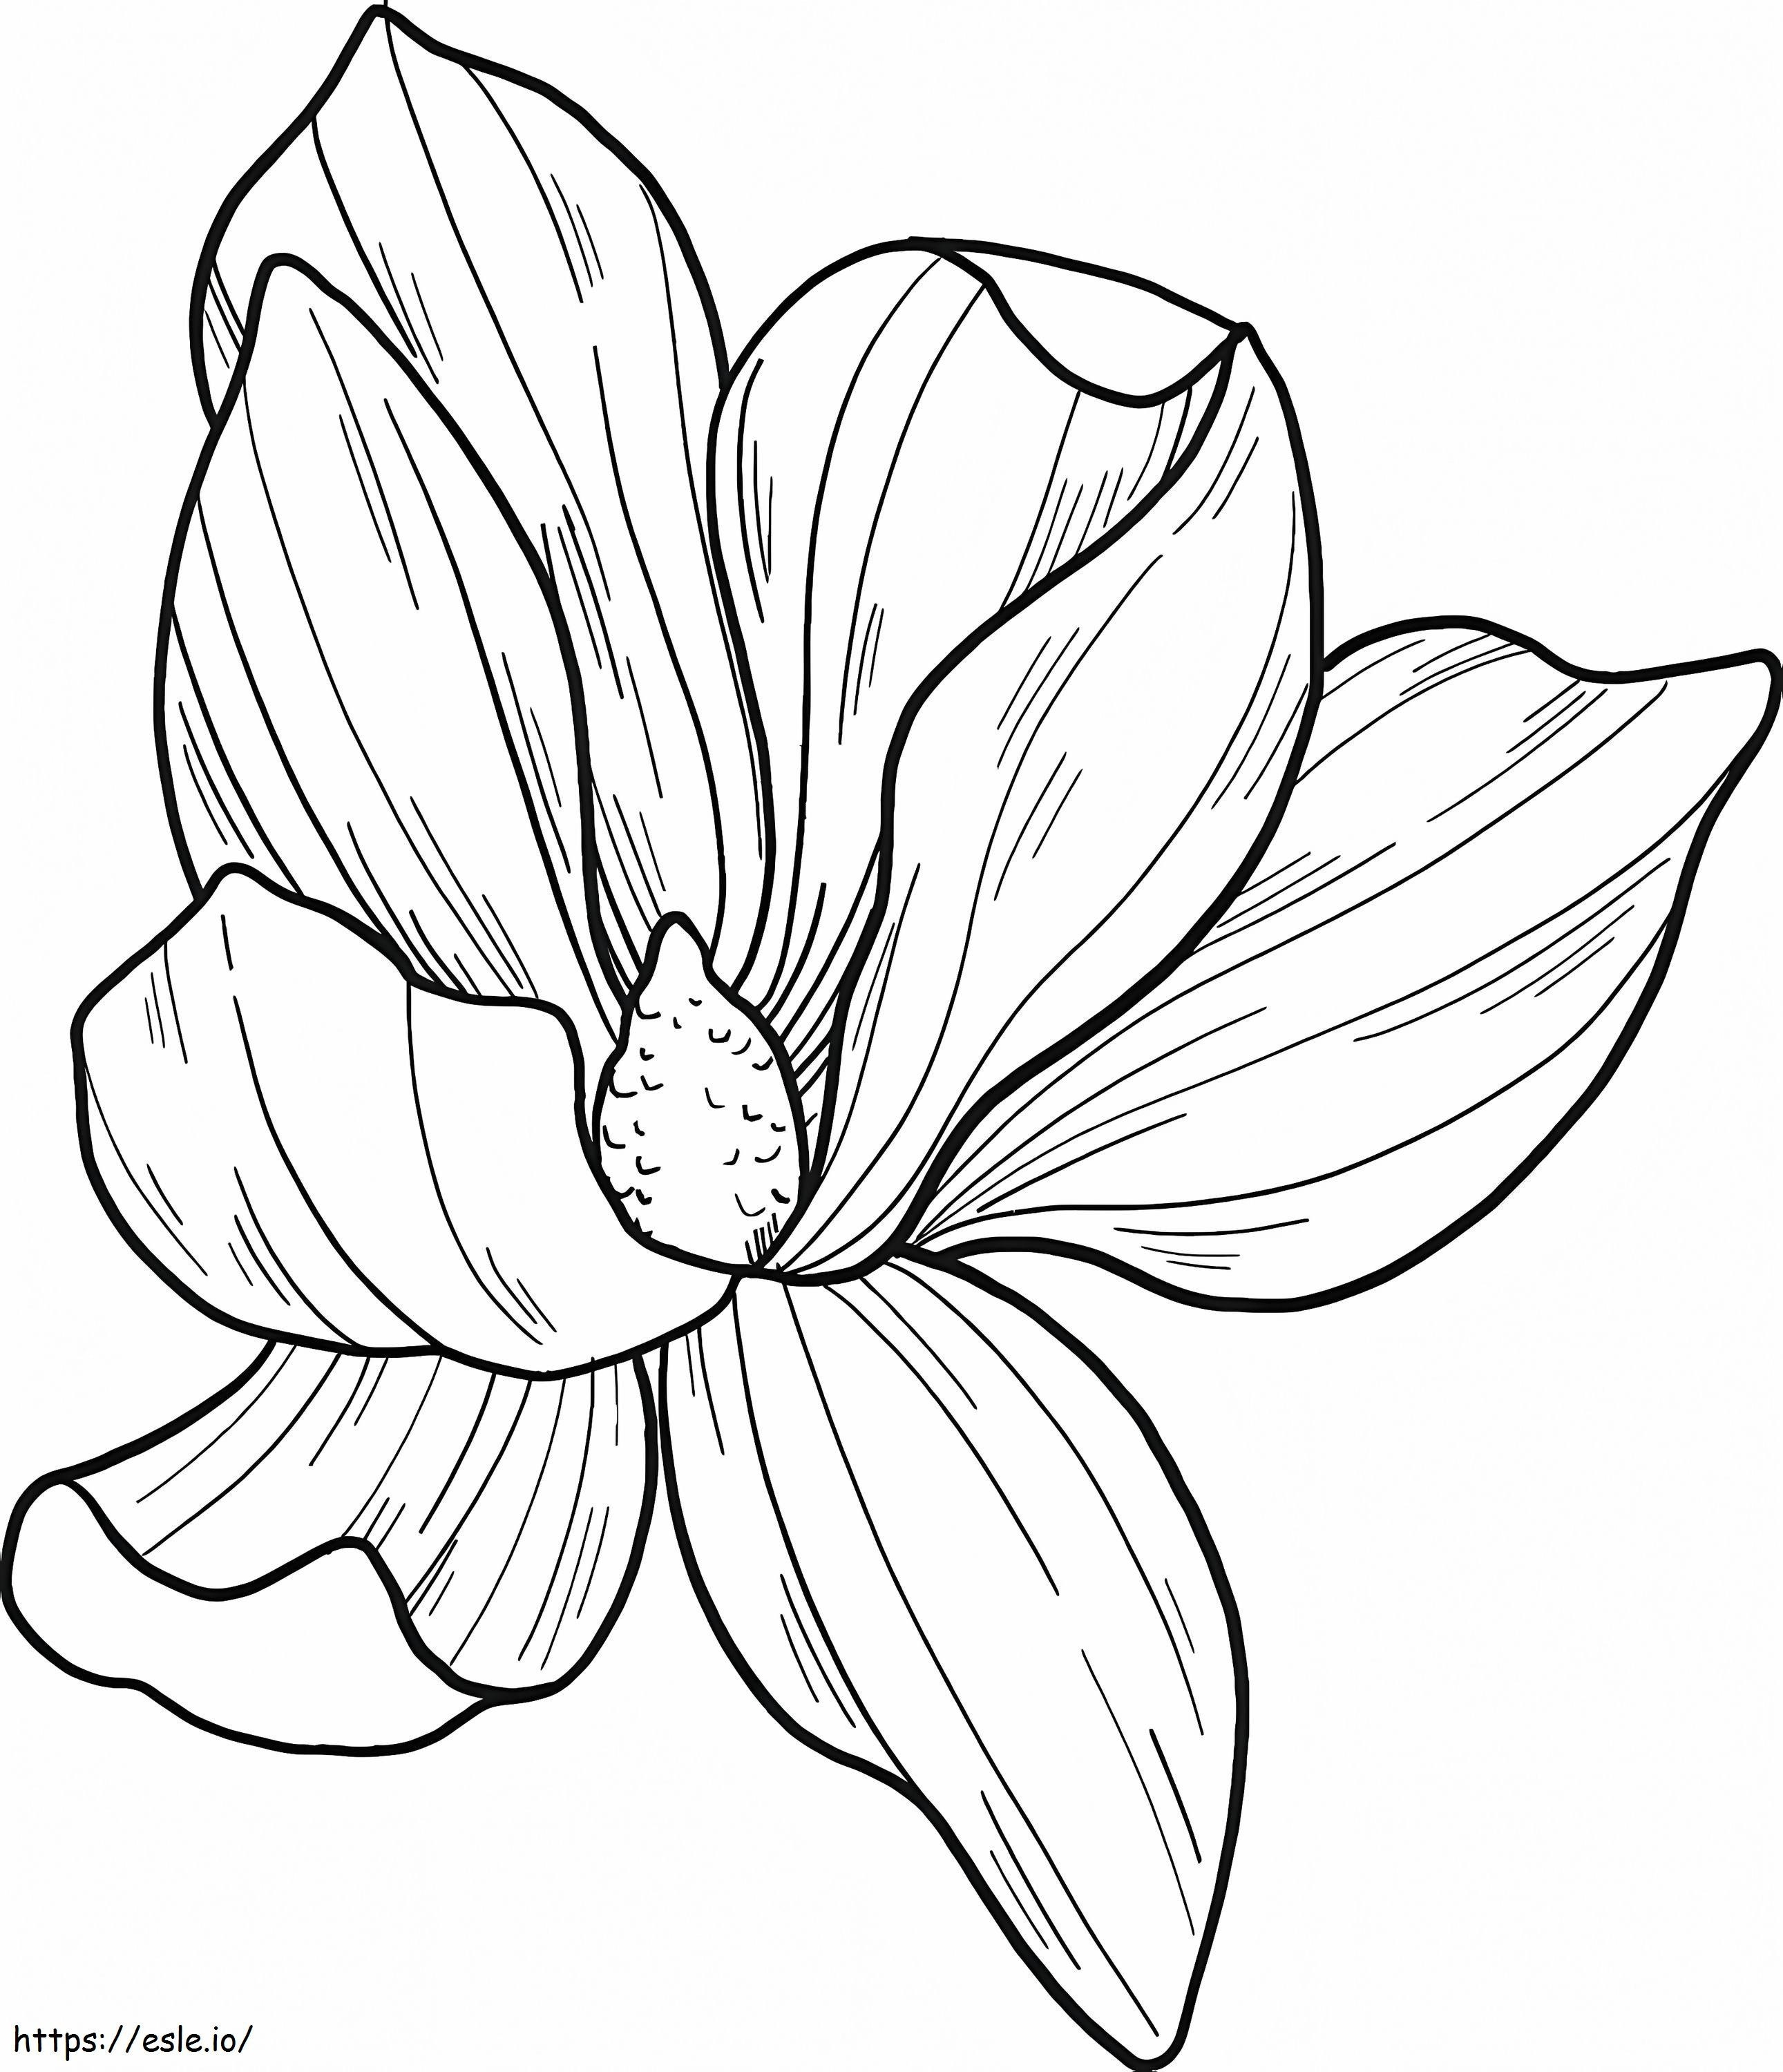 Magnolia Flower 1 coloring page